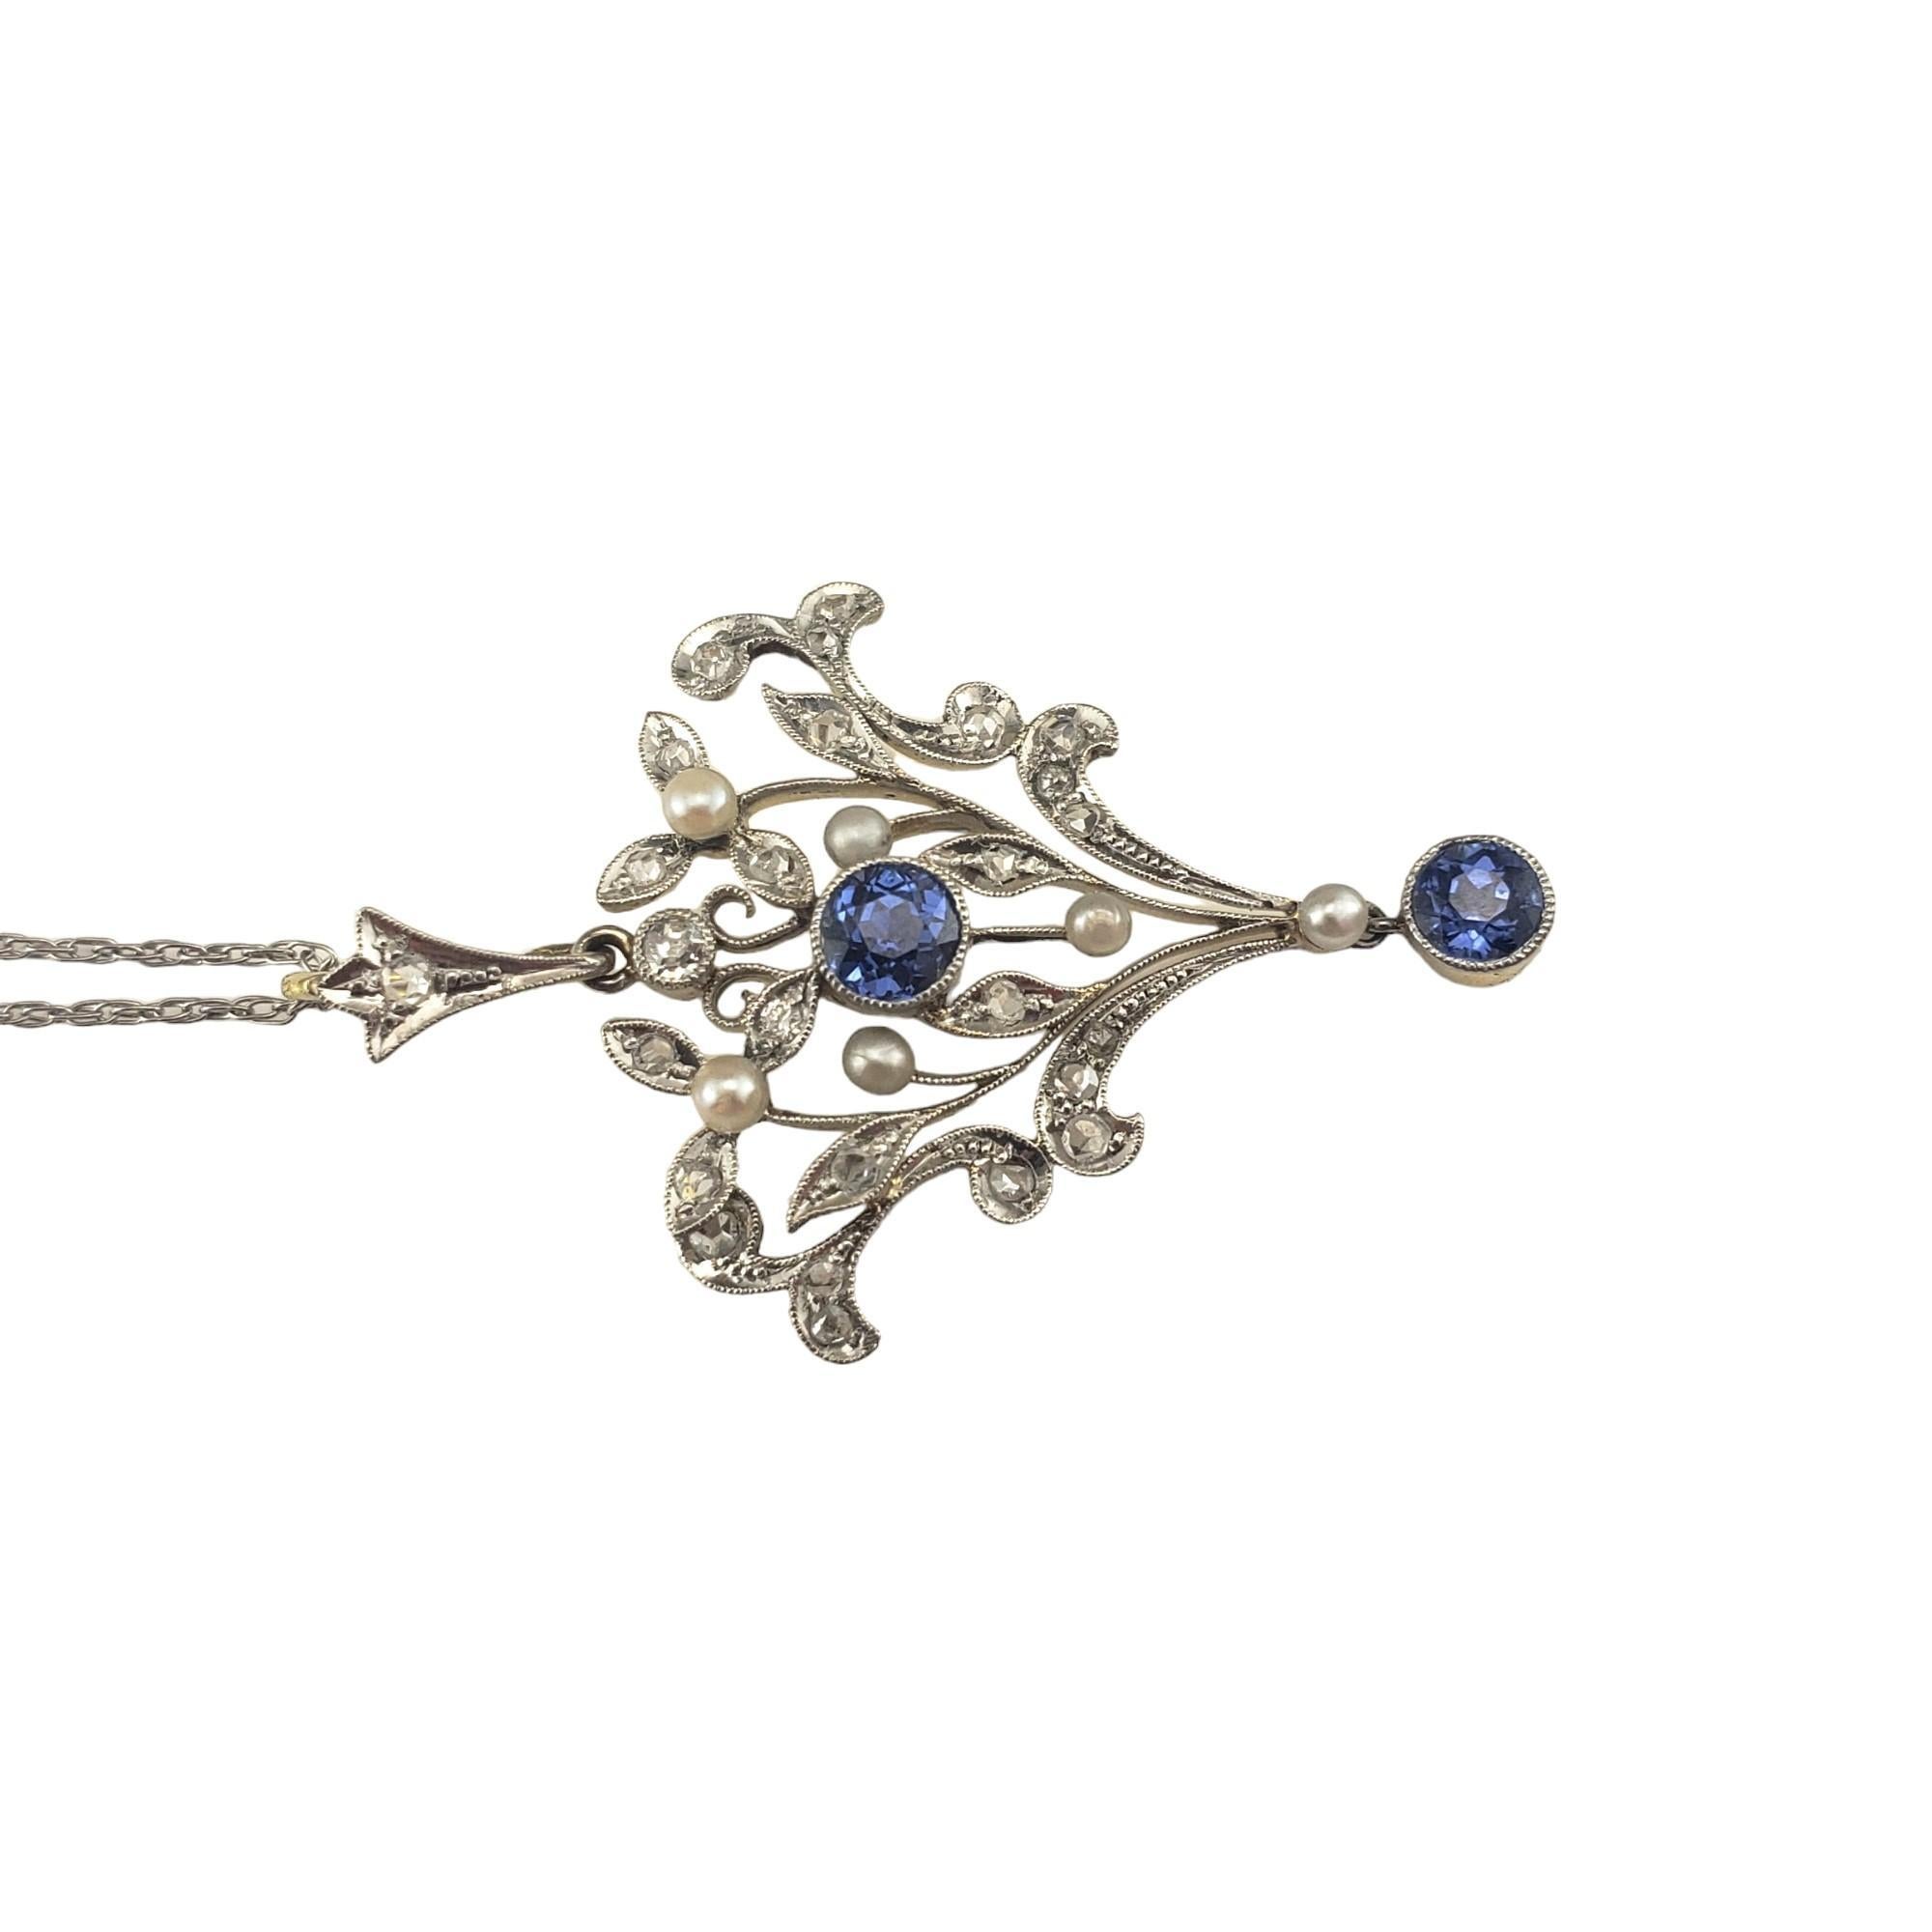 Vintage Platinum and Diamond Pendant Necklace-

This elegant pendant features two round blue sapphires (4 mm), 25 rose cut diamonds and five freshwater pearls set in beautifully detailed platinum.  Pendant is backed in 13K yellow gold which is